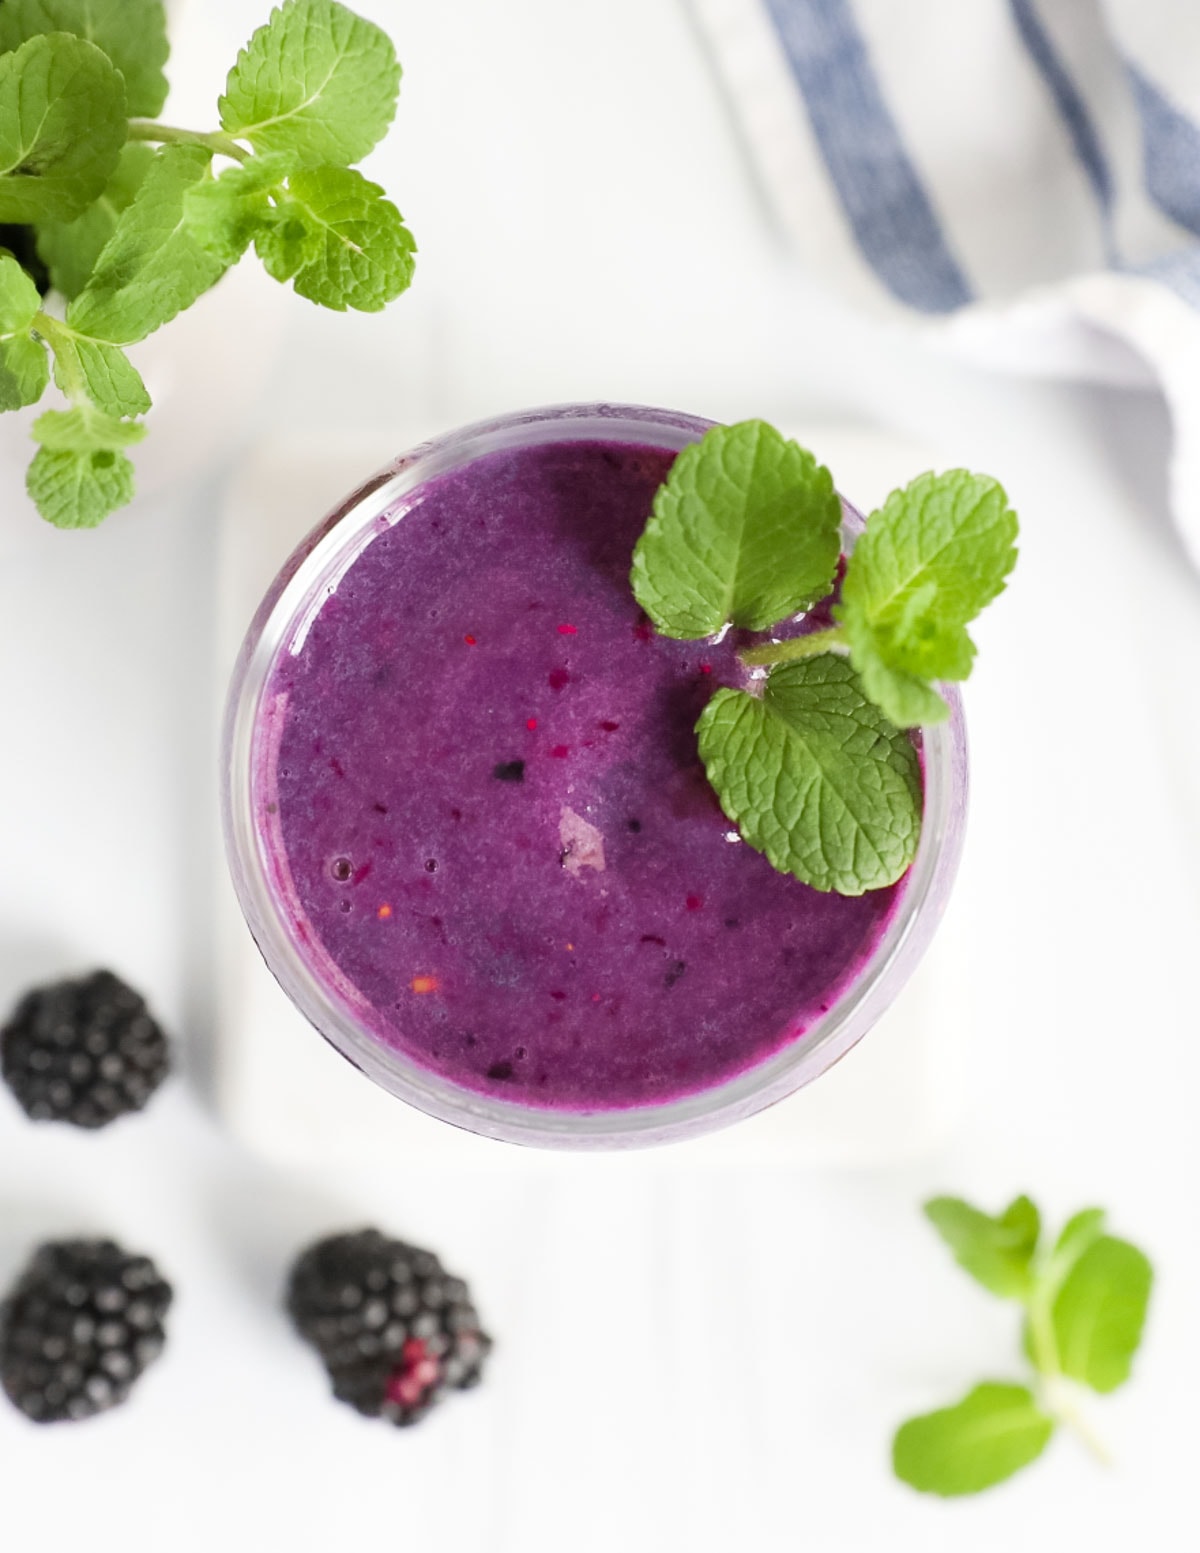 A clear cup with a purple smoothie inside and fresh mint leaves on top of the smoothie.